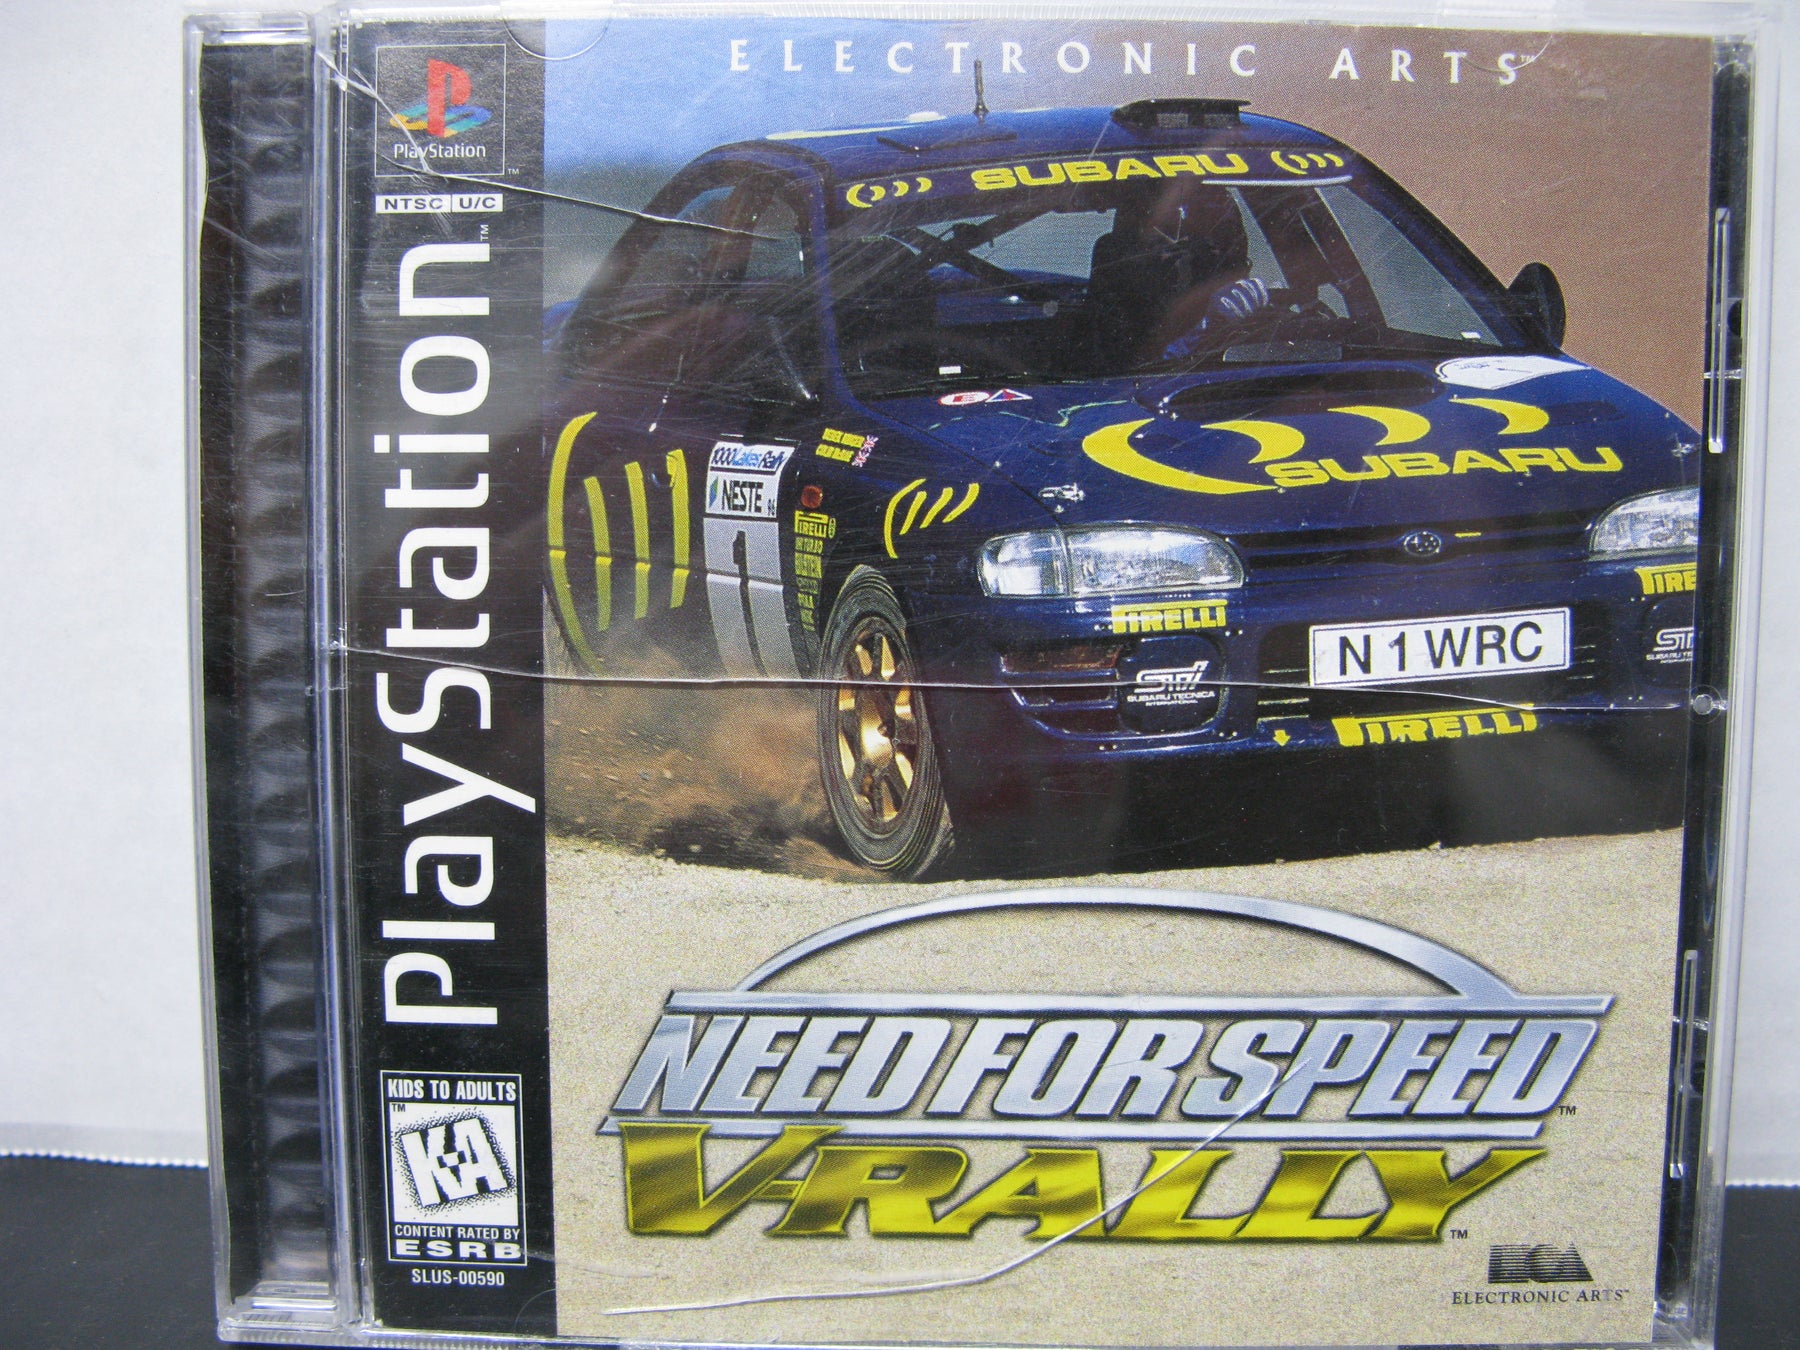 Need for Speed: V-Rally 2 (Sony PlayStation 1, 1999) for sale online